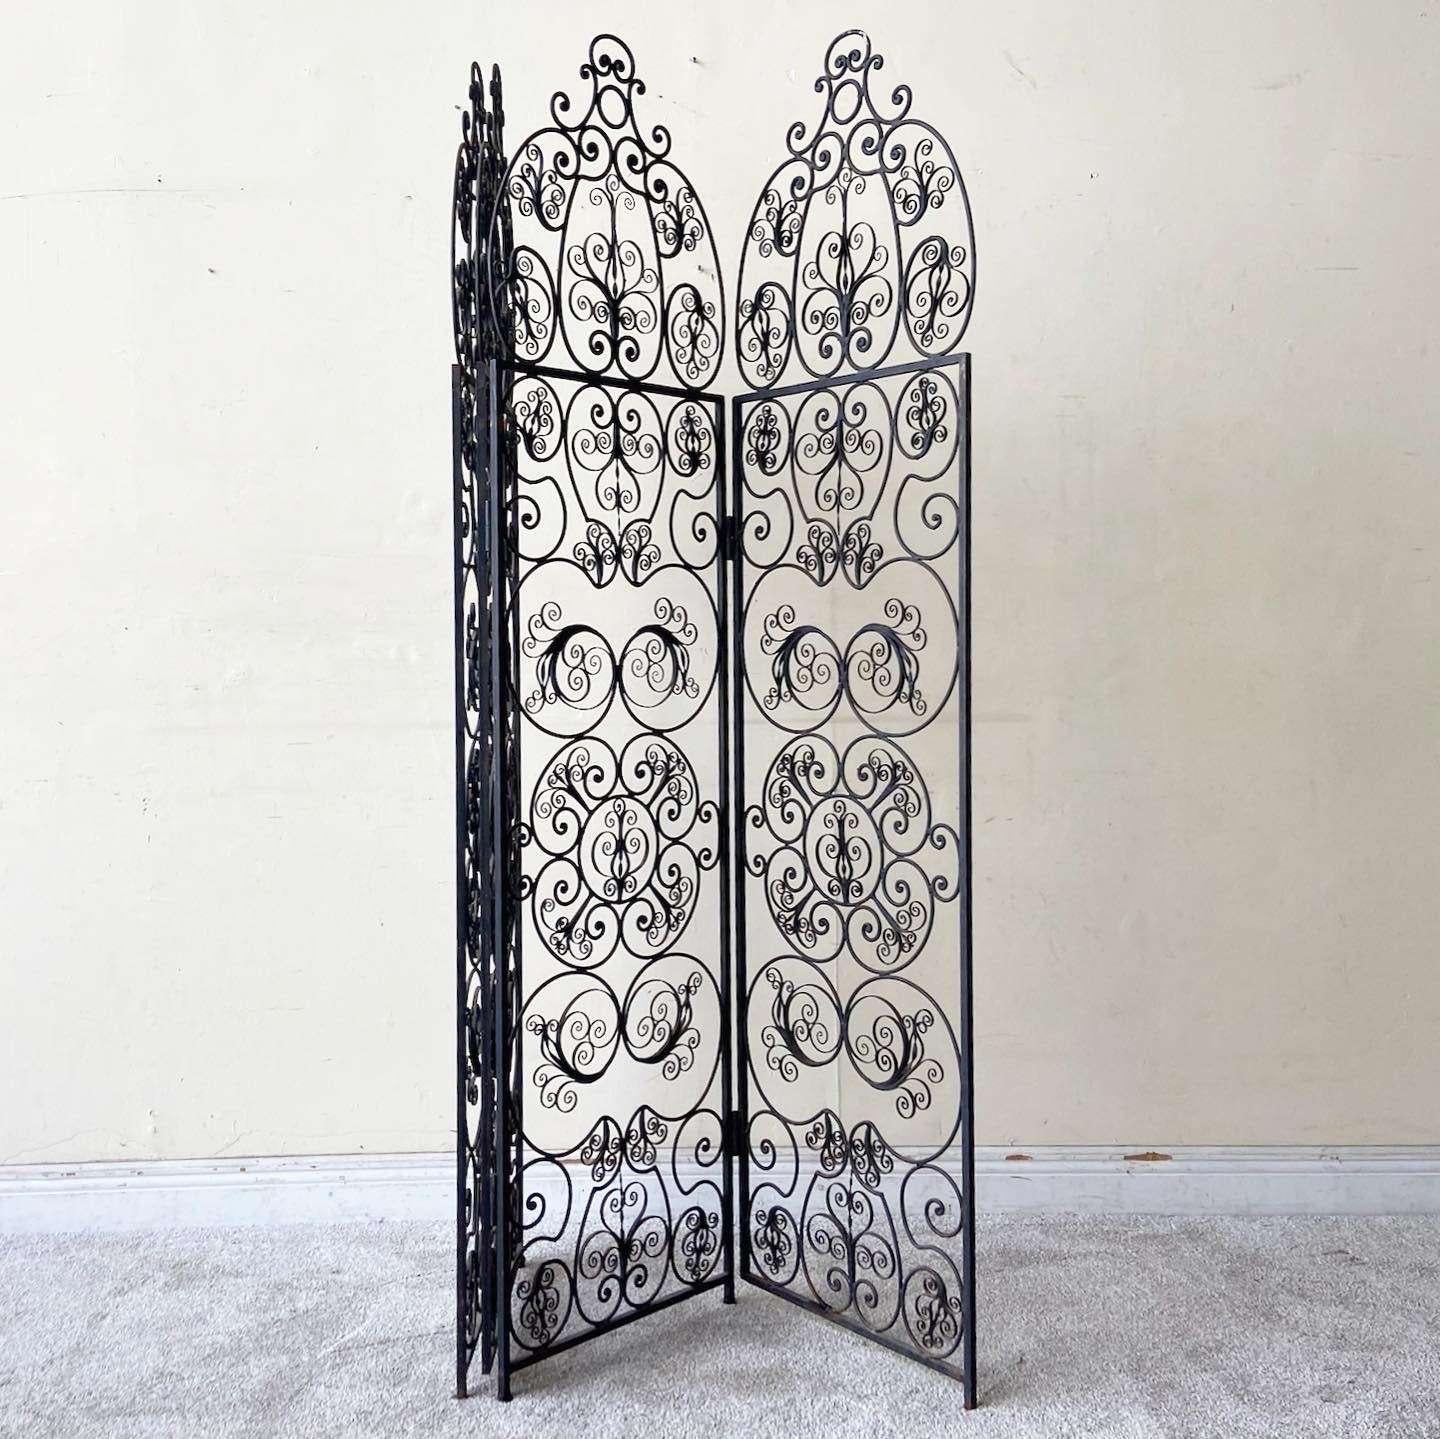 Antique Wrought Iron Room Divider - 4 Panels 1